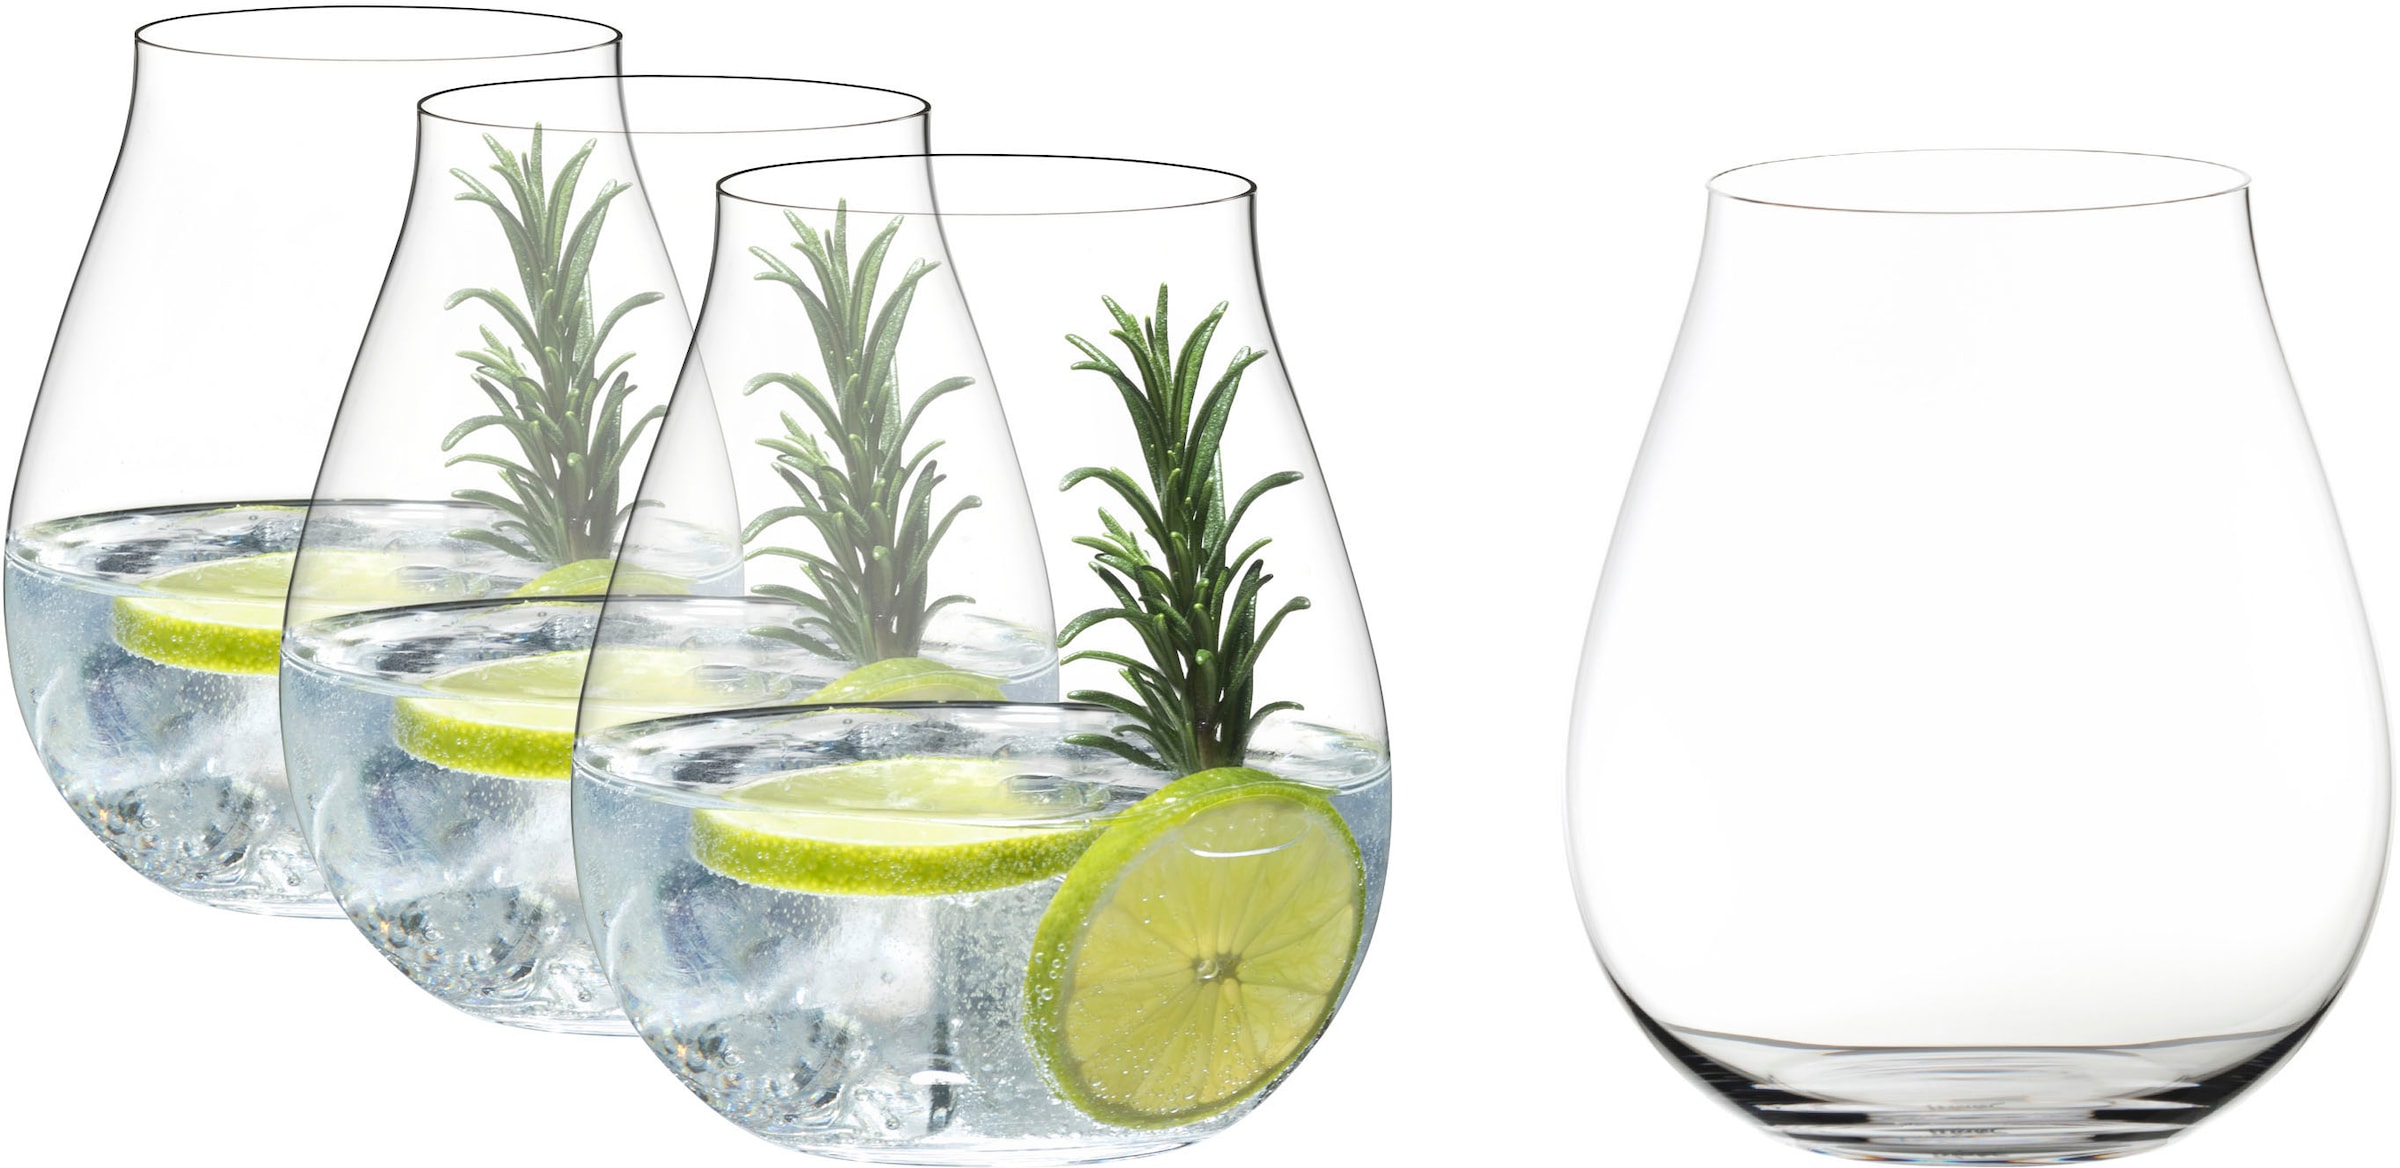 RIEDEL THE SPIRIT GLASS COMPANY Cocktailglas »Mixing Sets«, (Set, 4 tlg., GIN SET Classic), Made in Germany, 760 ml, 4-teilig